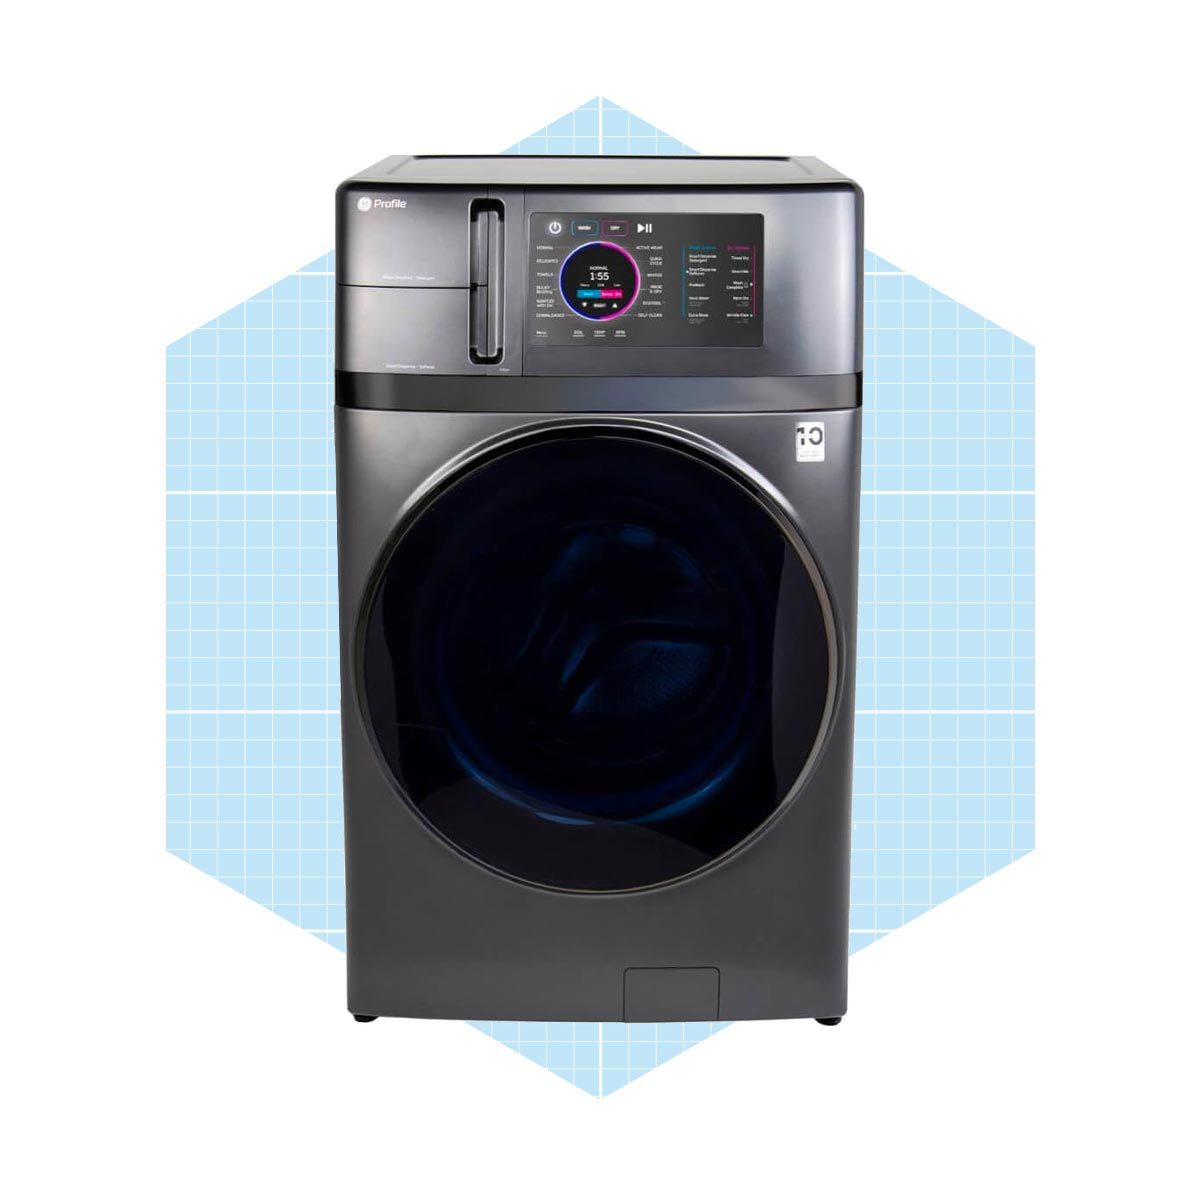 Washer and Dryer Solutions for Apartments without Hookups 